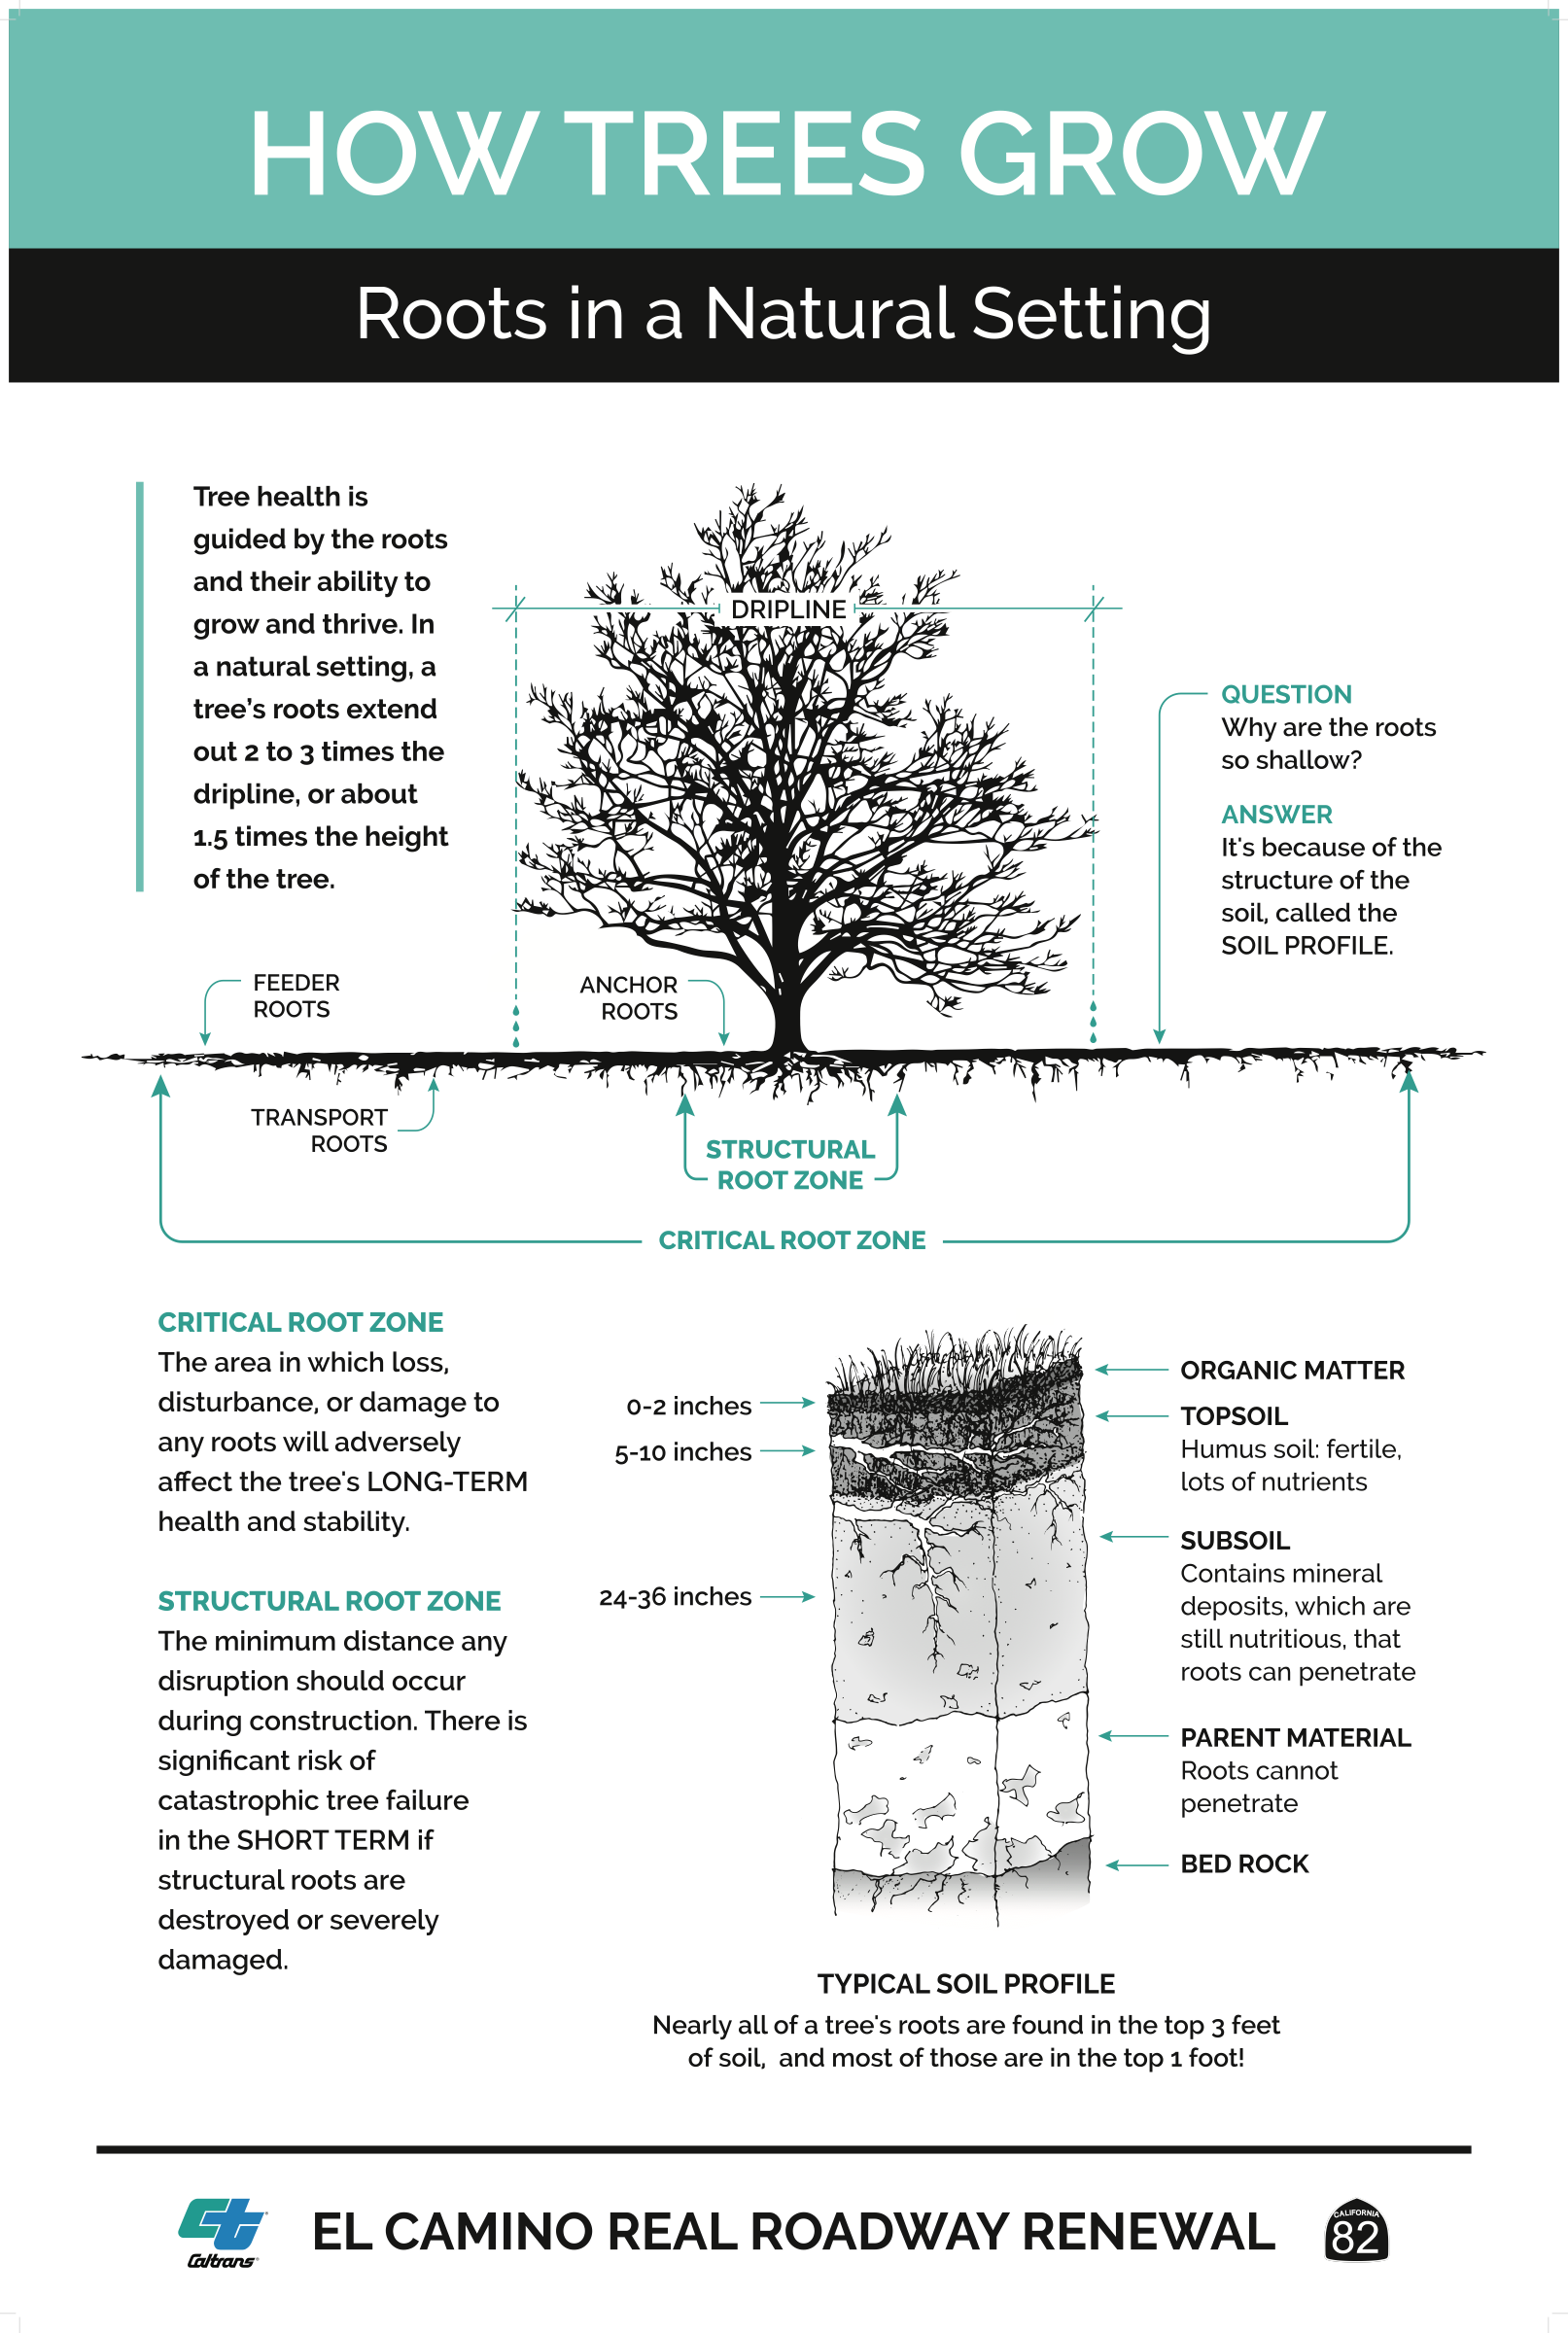 how trees grow - roots in a natural setting